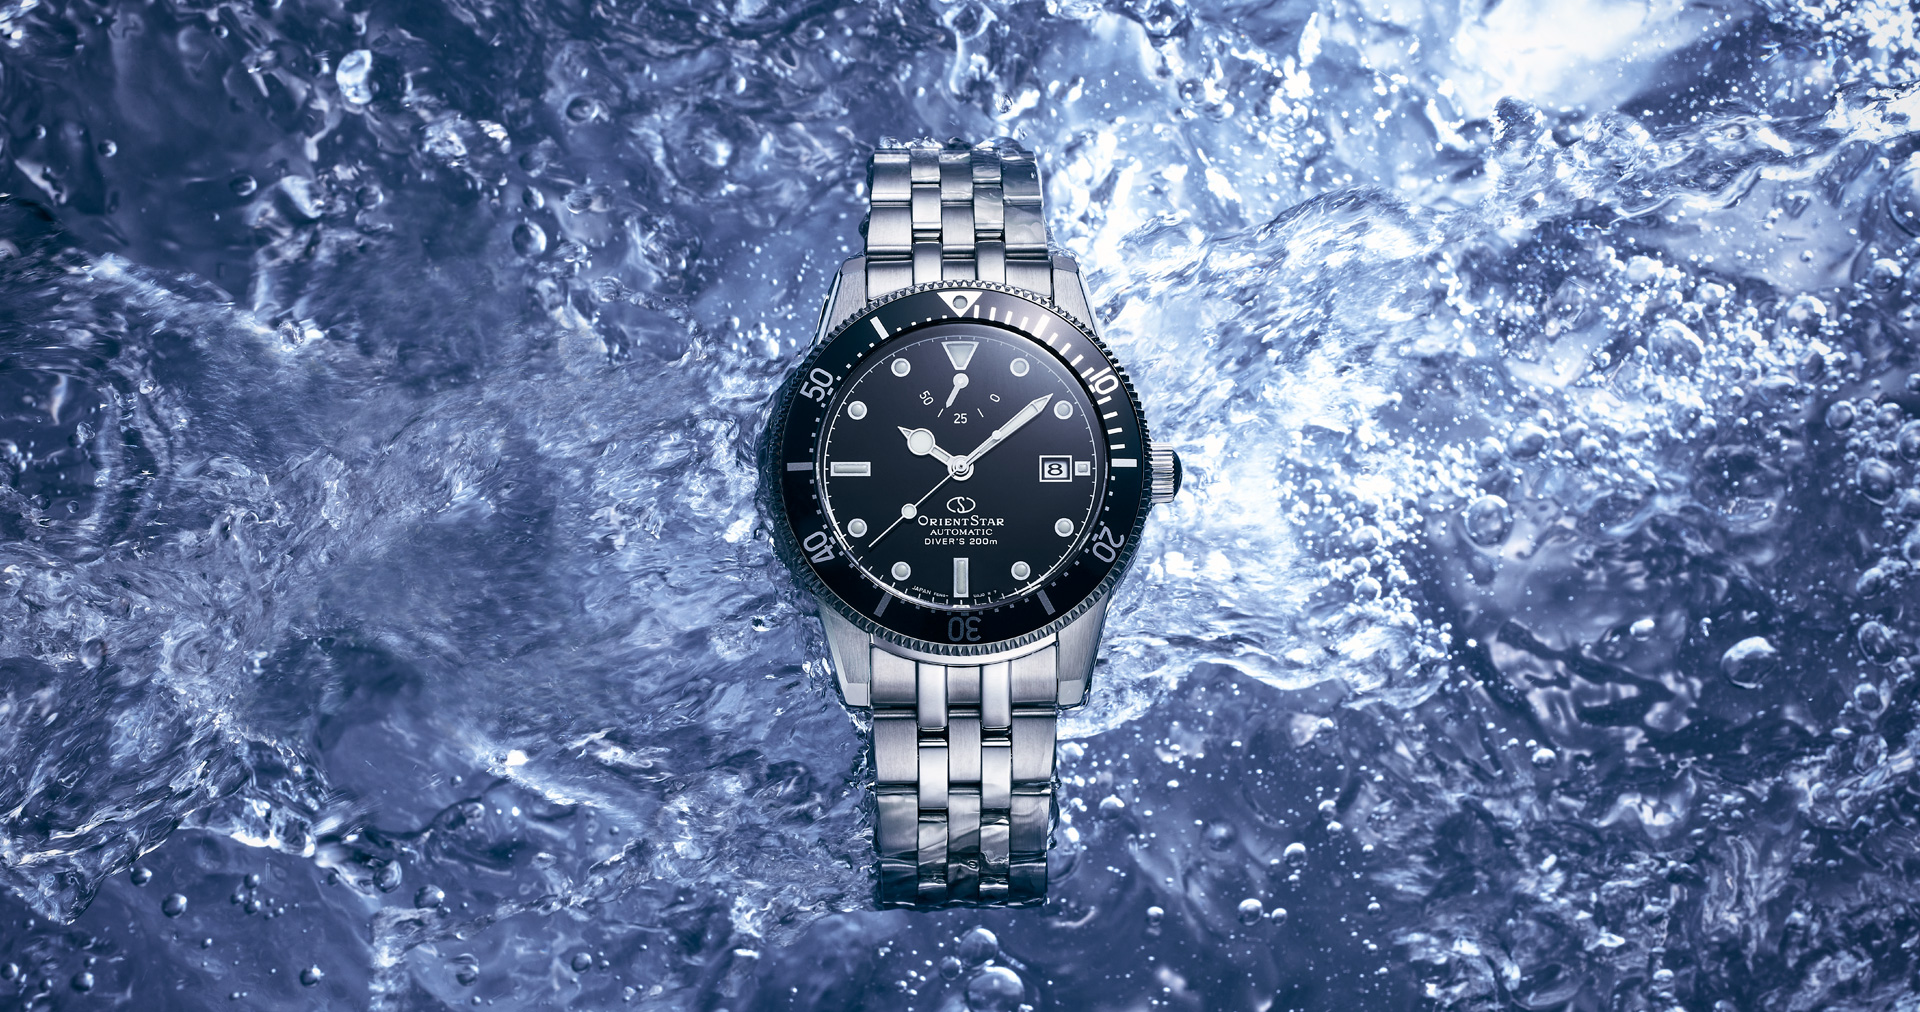 DIVER 1964 2nd edition